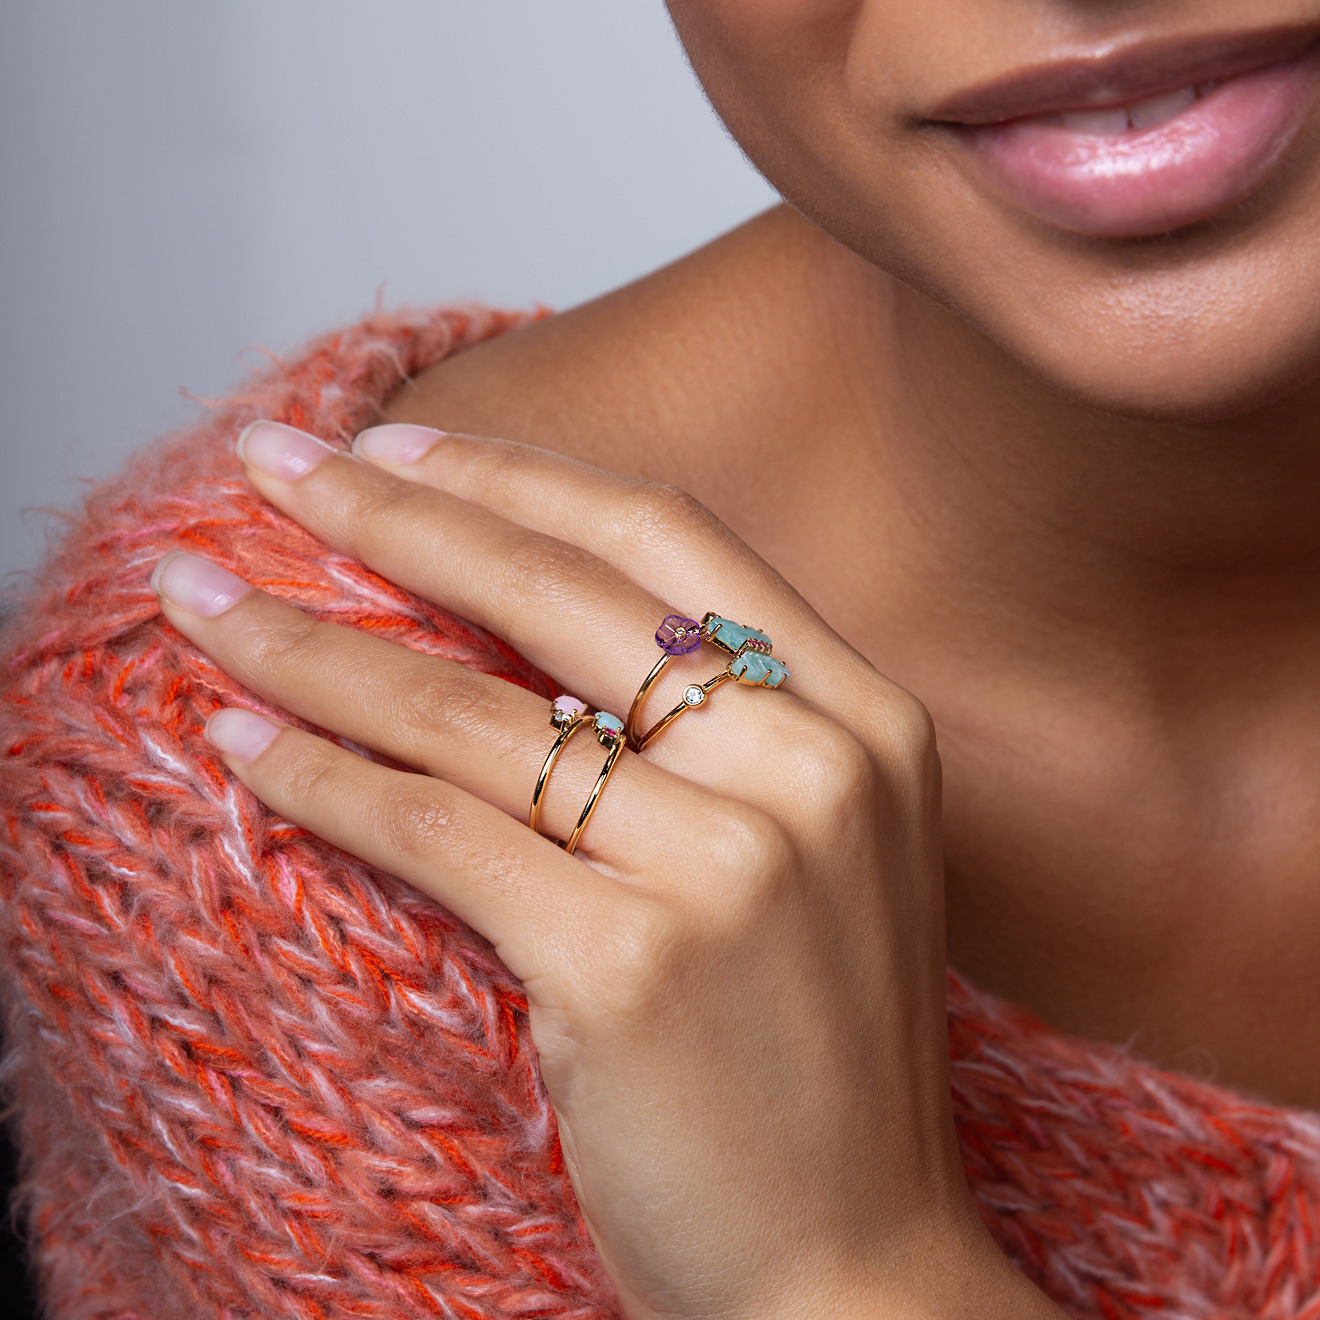 Mini Ivette ring in yellow gold with amazonite and ruby – buy at Poison  Drop online store, SKU